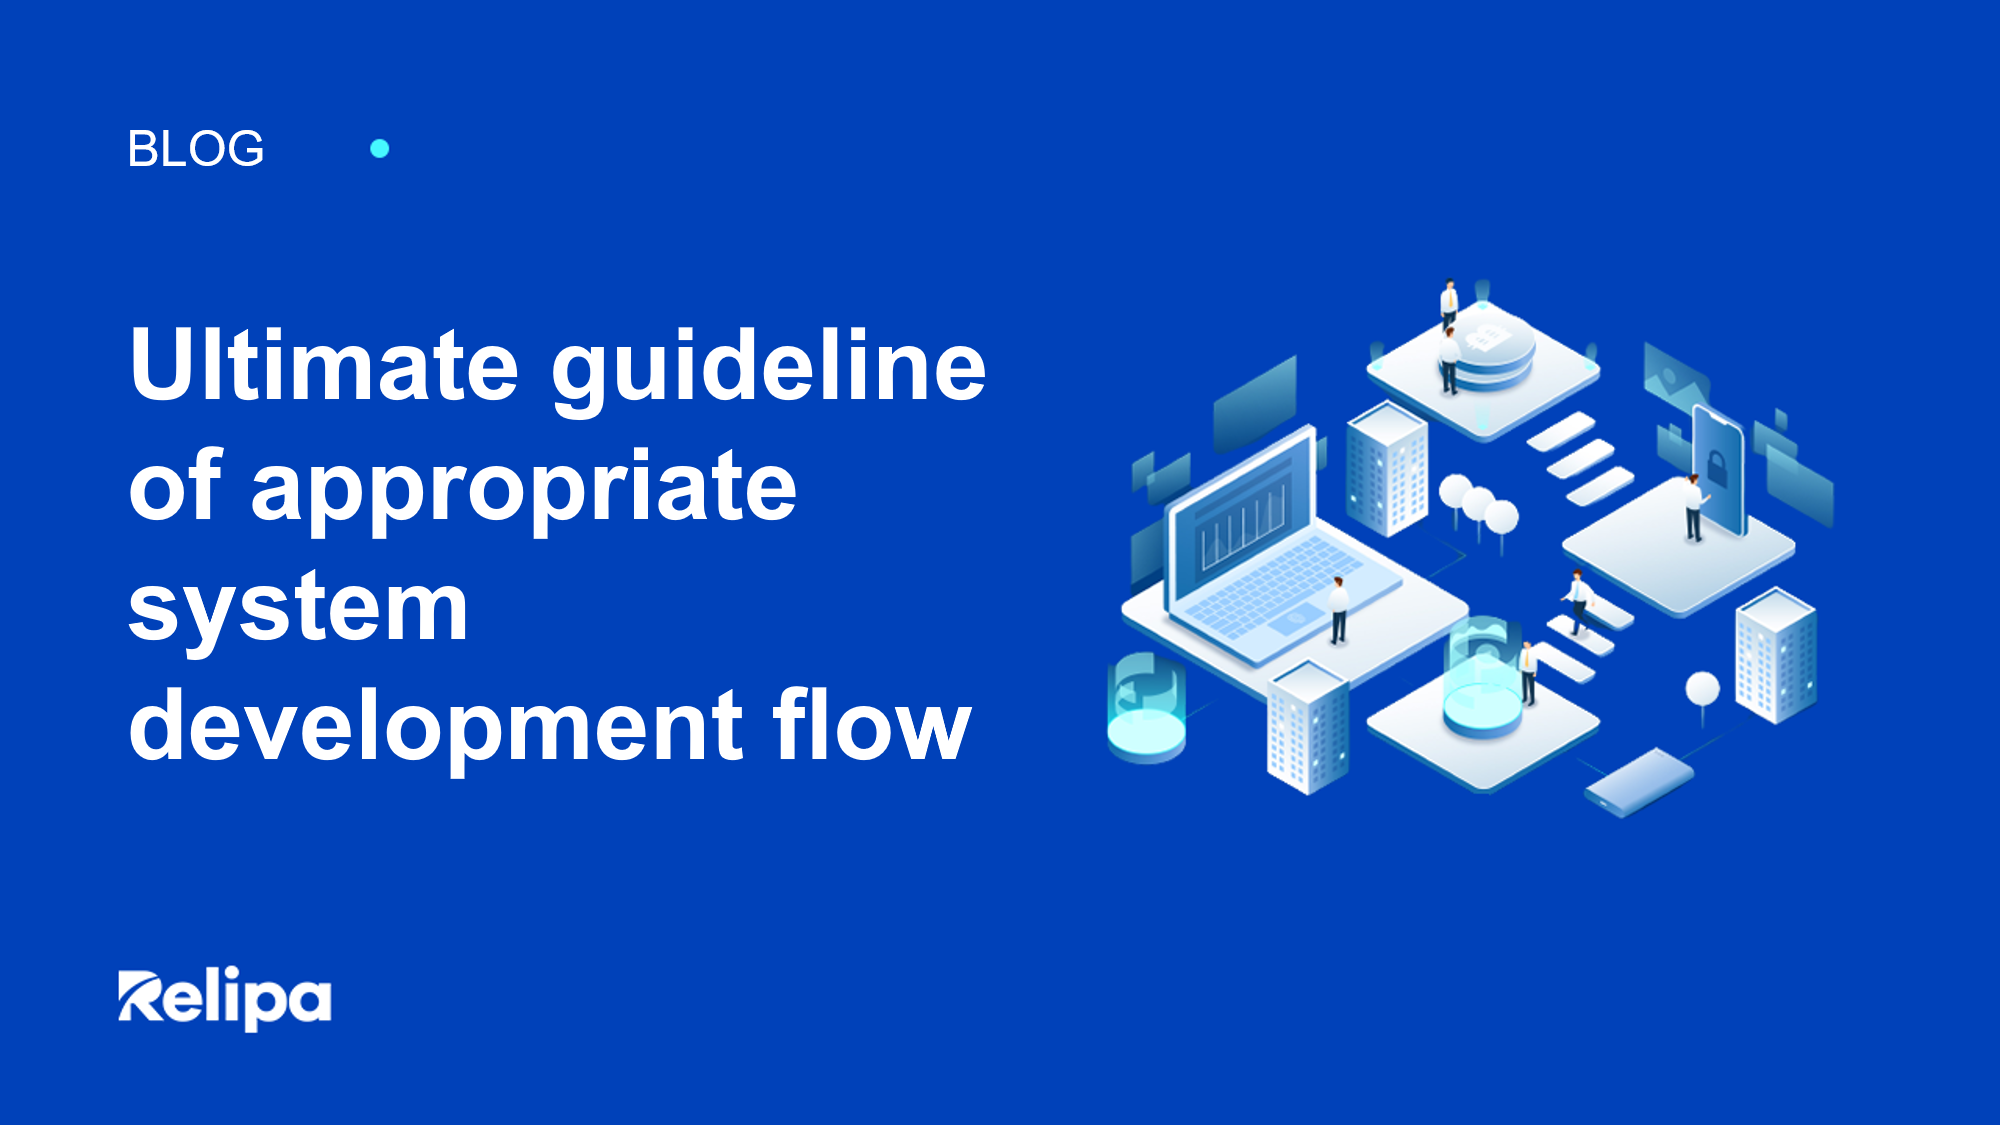 Ultimate guideline of appropriate system development flow